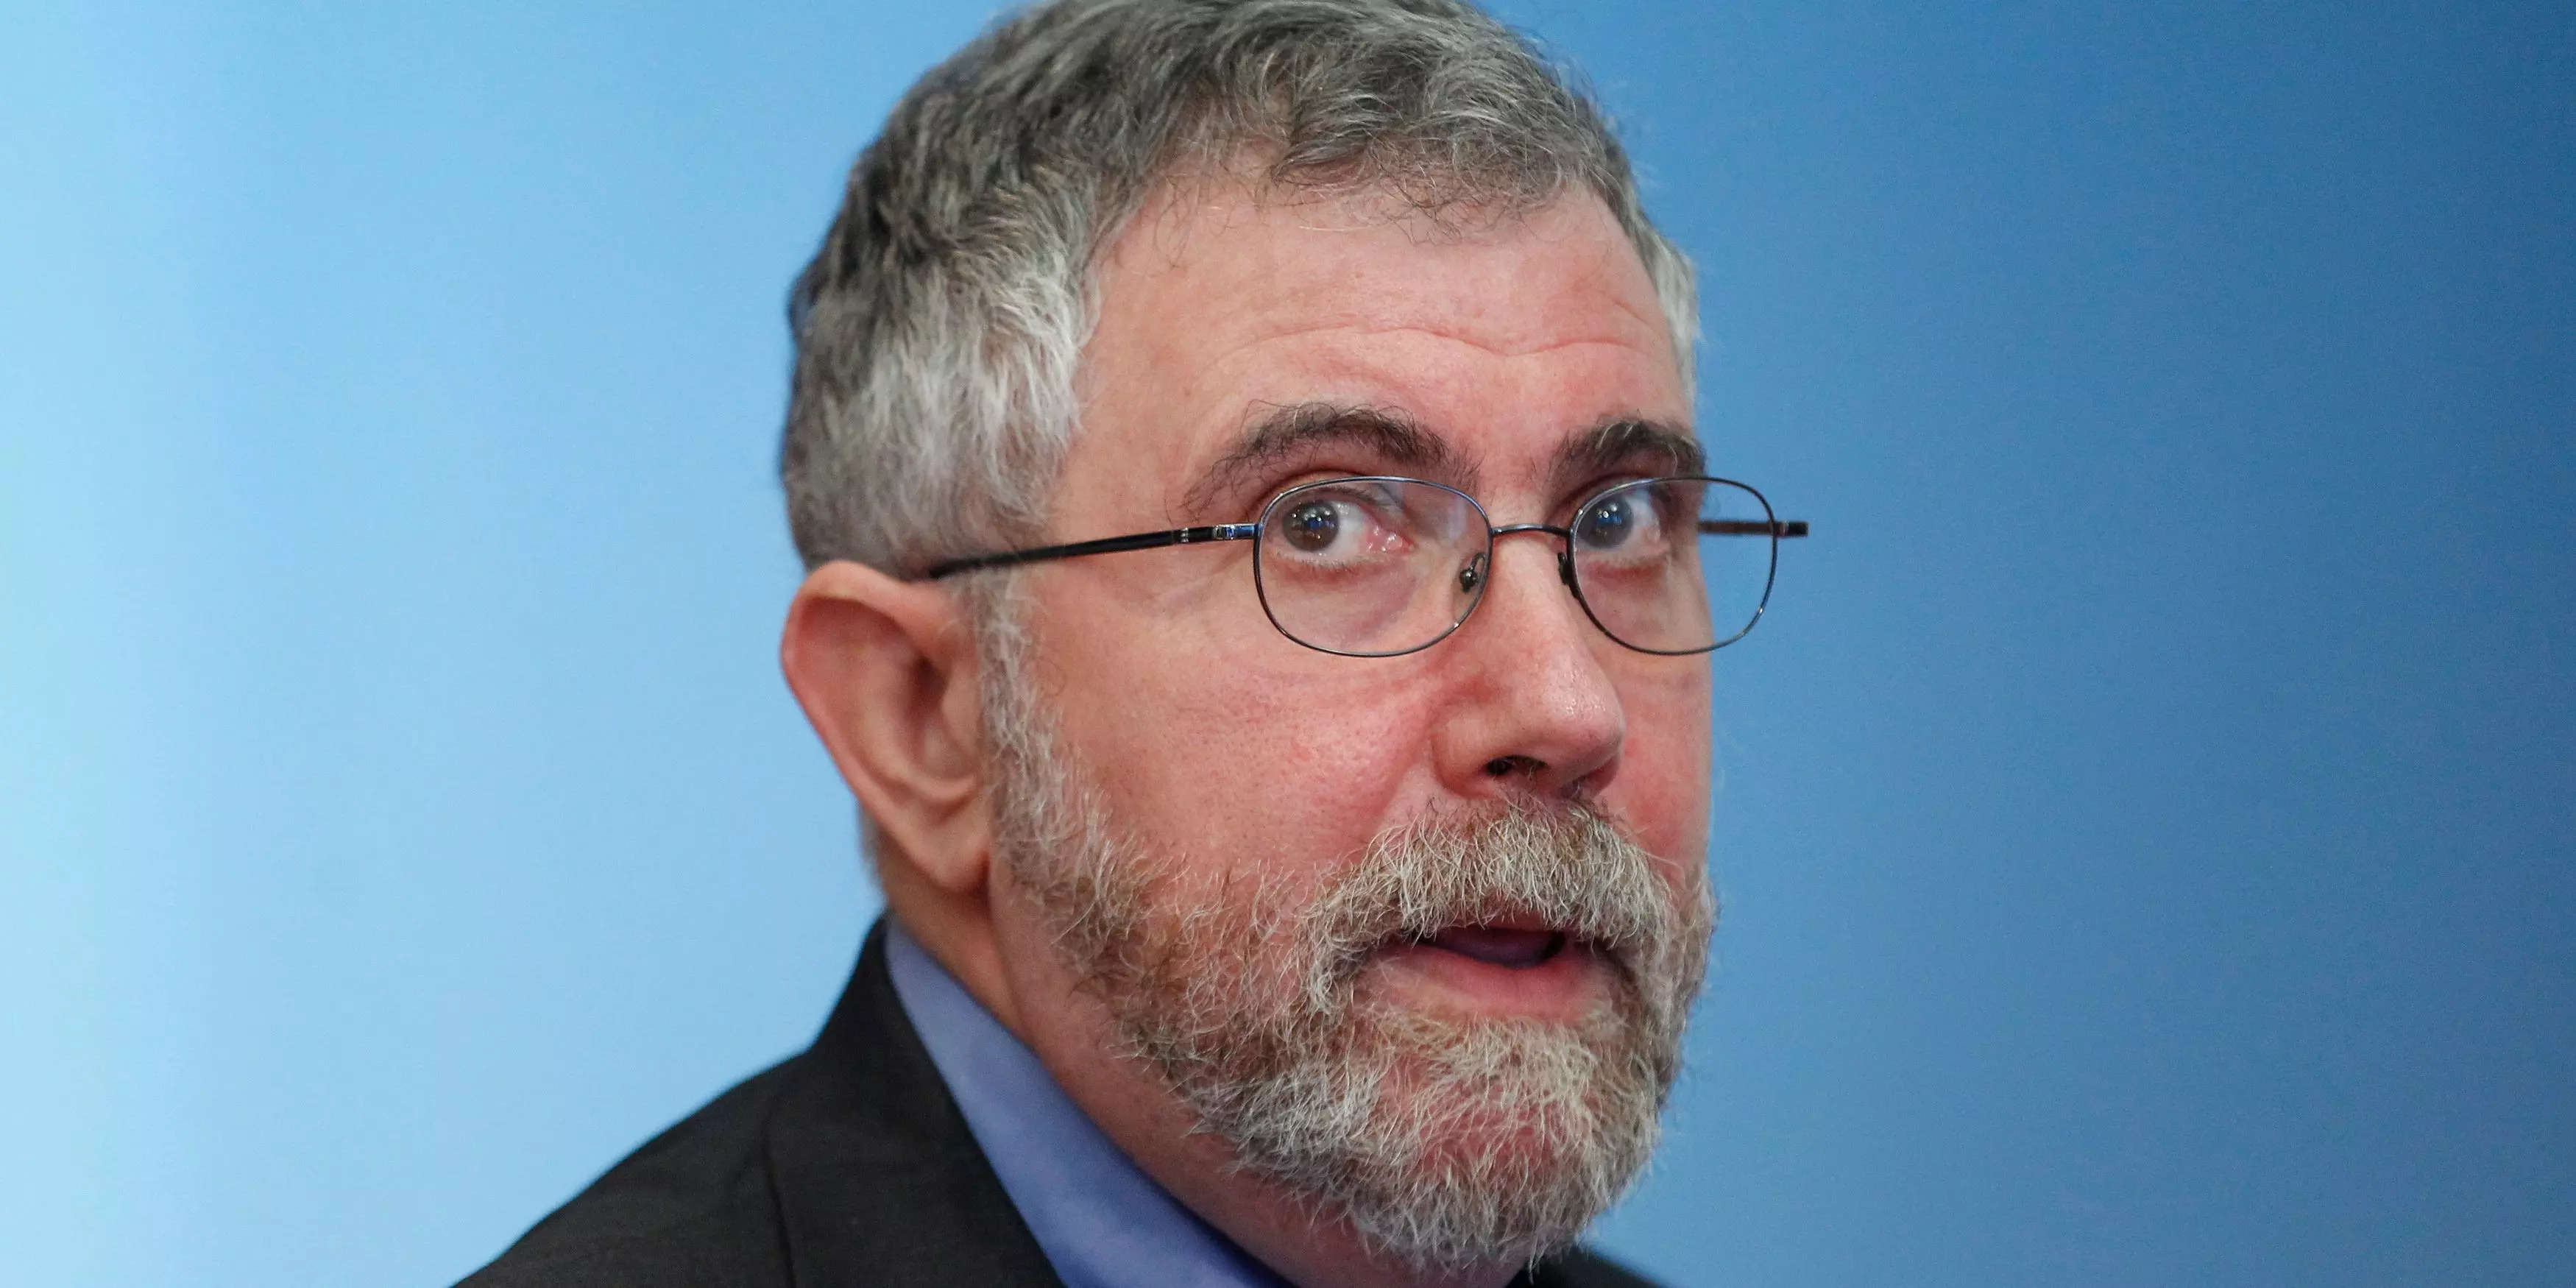 The UK economy and the British pound could be in for more pain if the Bank of England falters on raising interest rates, says top economist Paul Krugman